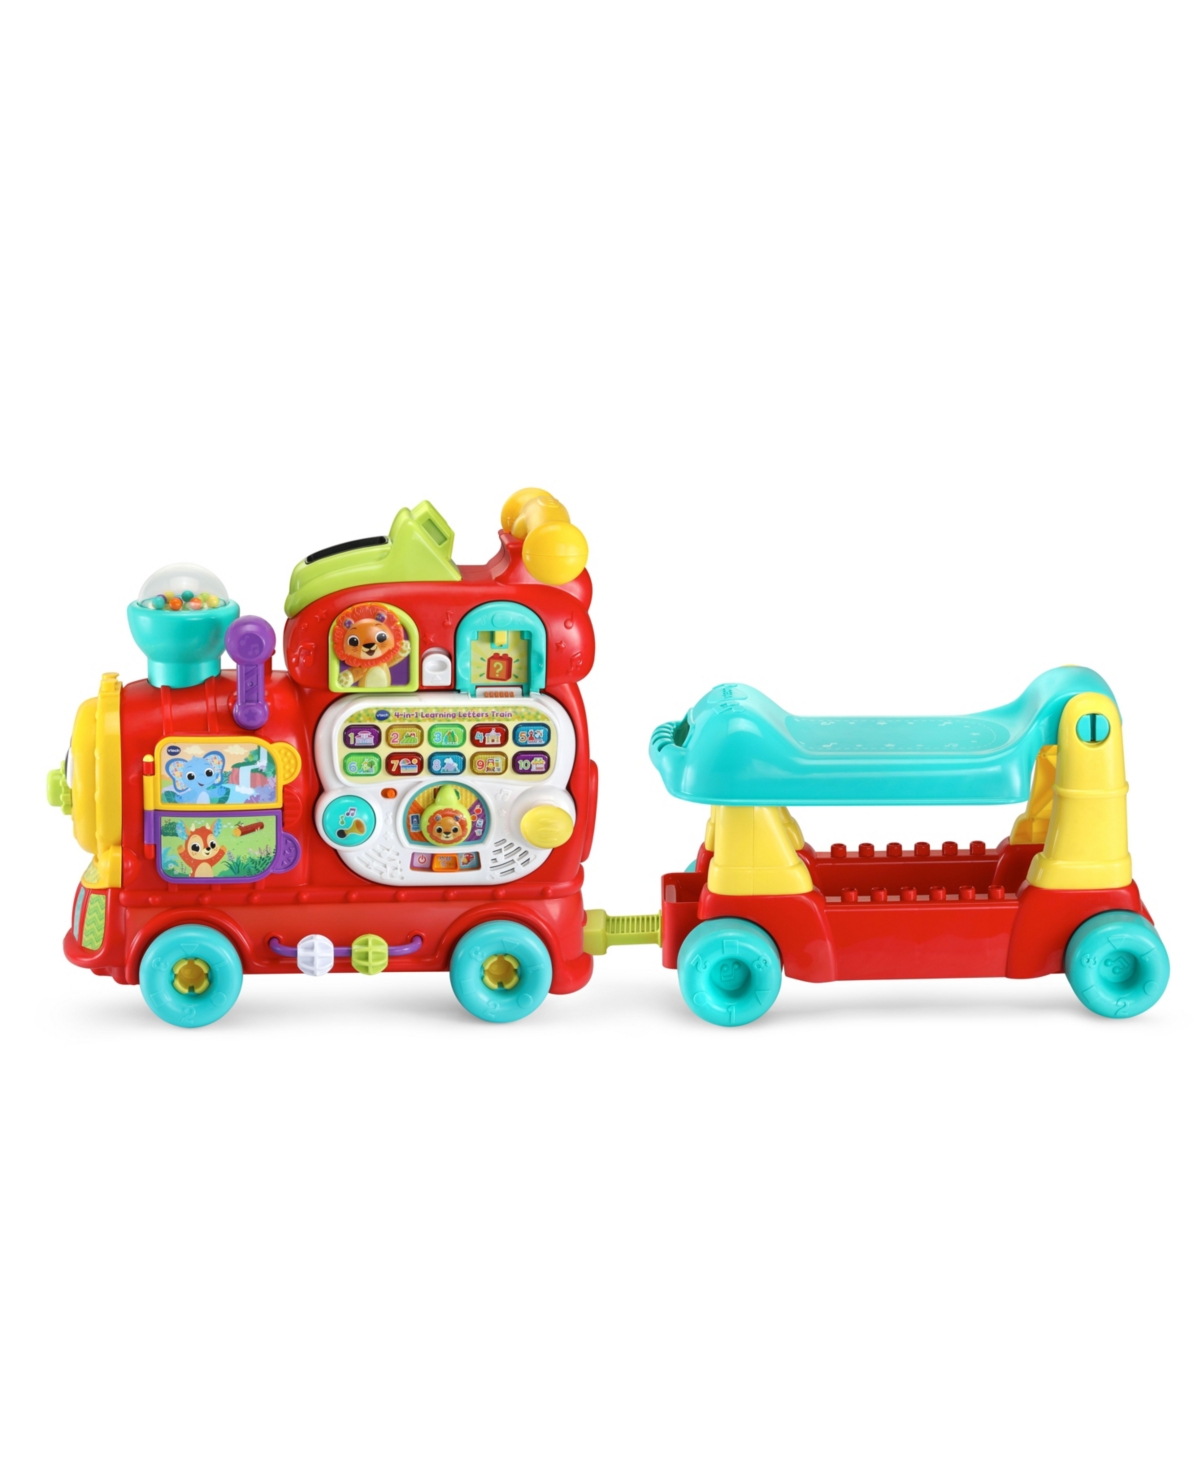 Vtech Babies' 4-in-1 Learning Letters Train In Multi Color